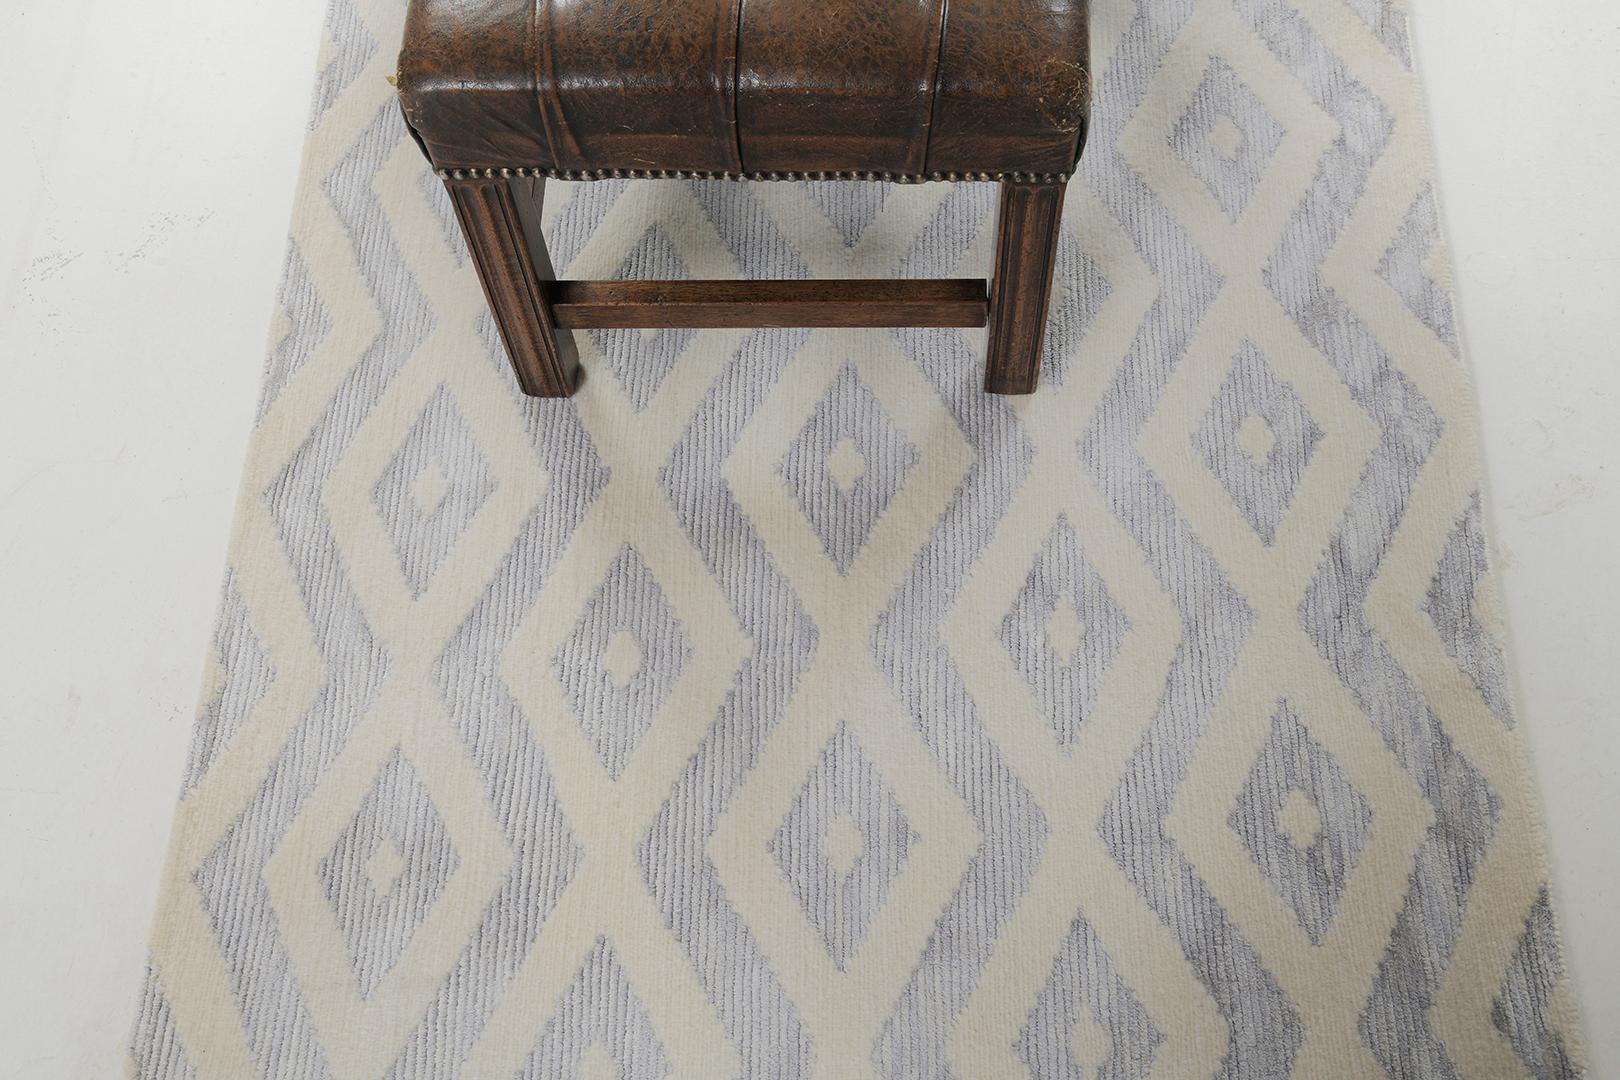 Quadri is a unique transitional design from the Allure collection is the epitome of grace and sophistication. Quadri is a wool and silk pile weave that intricately weaves ivory and variegated tones of blue to perfection.

Rug